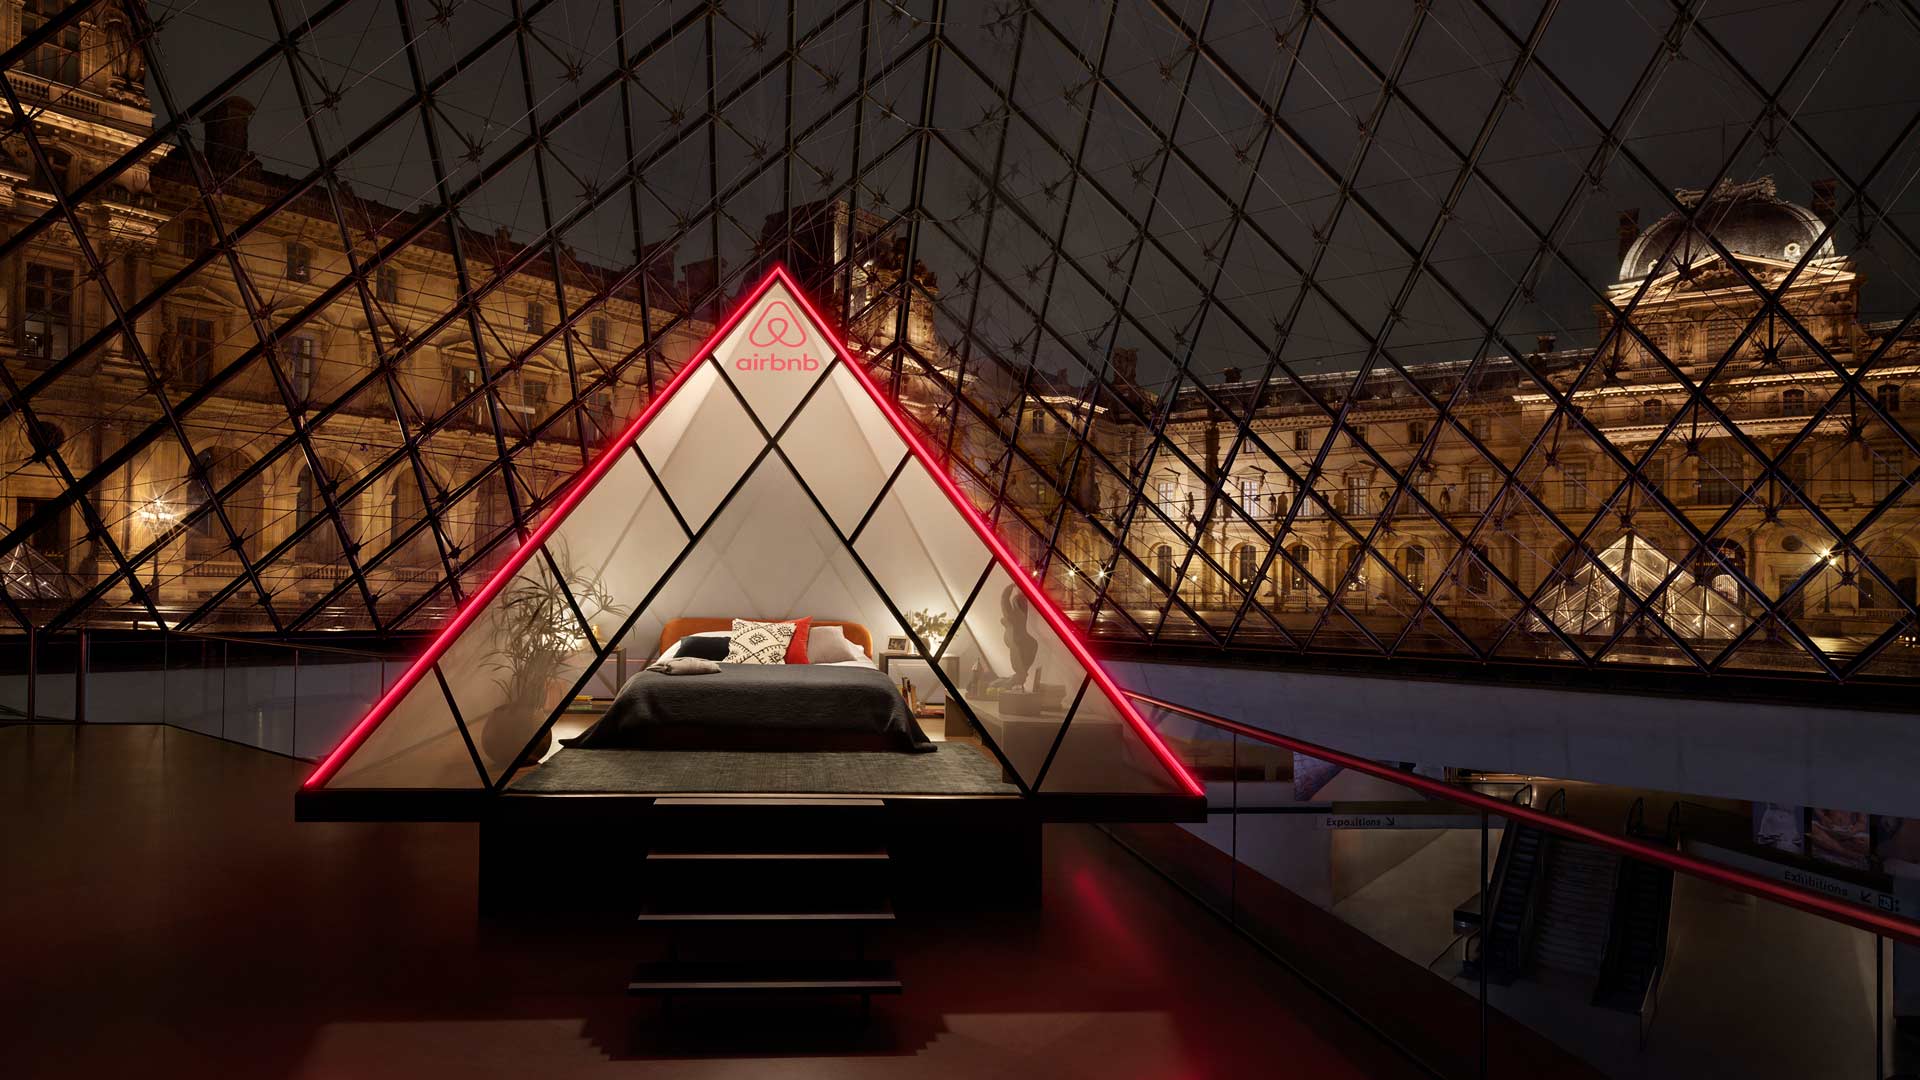 Airbnb Is Giving Away an Insane Sleepover Inside the Actual Louvre